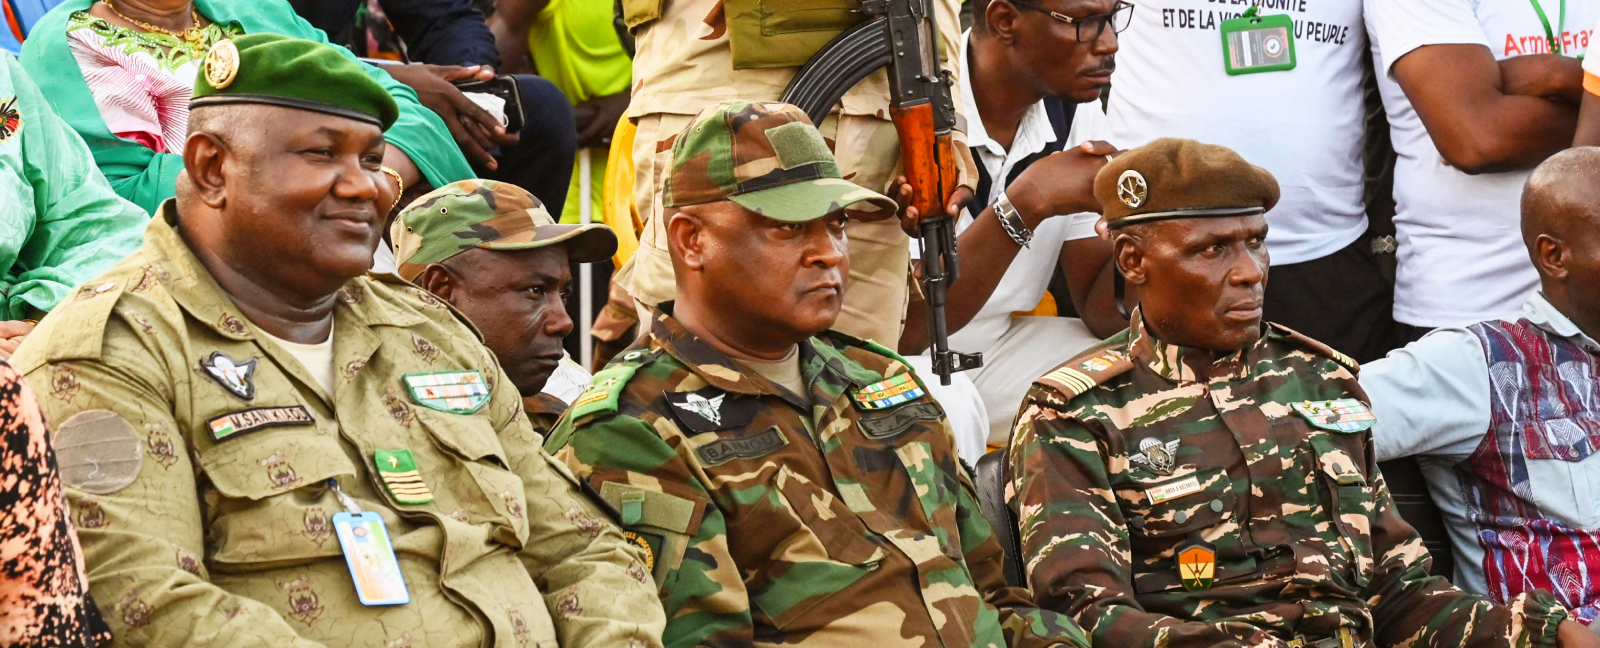 Niger's National Council for Safeguard of the Homeland (CNSP) leaders Colonel Mamane Sani Kiaou (L), General Moussan Salaou Barmou (C) and Colonel Ibroh Bachirou (2-R)